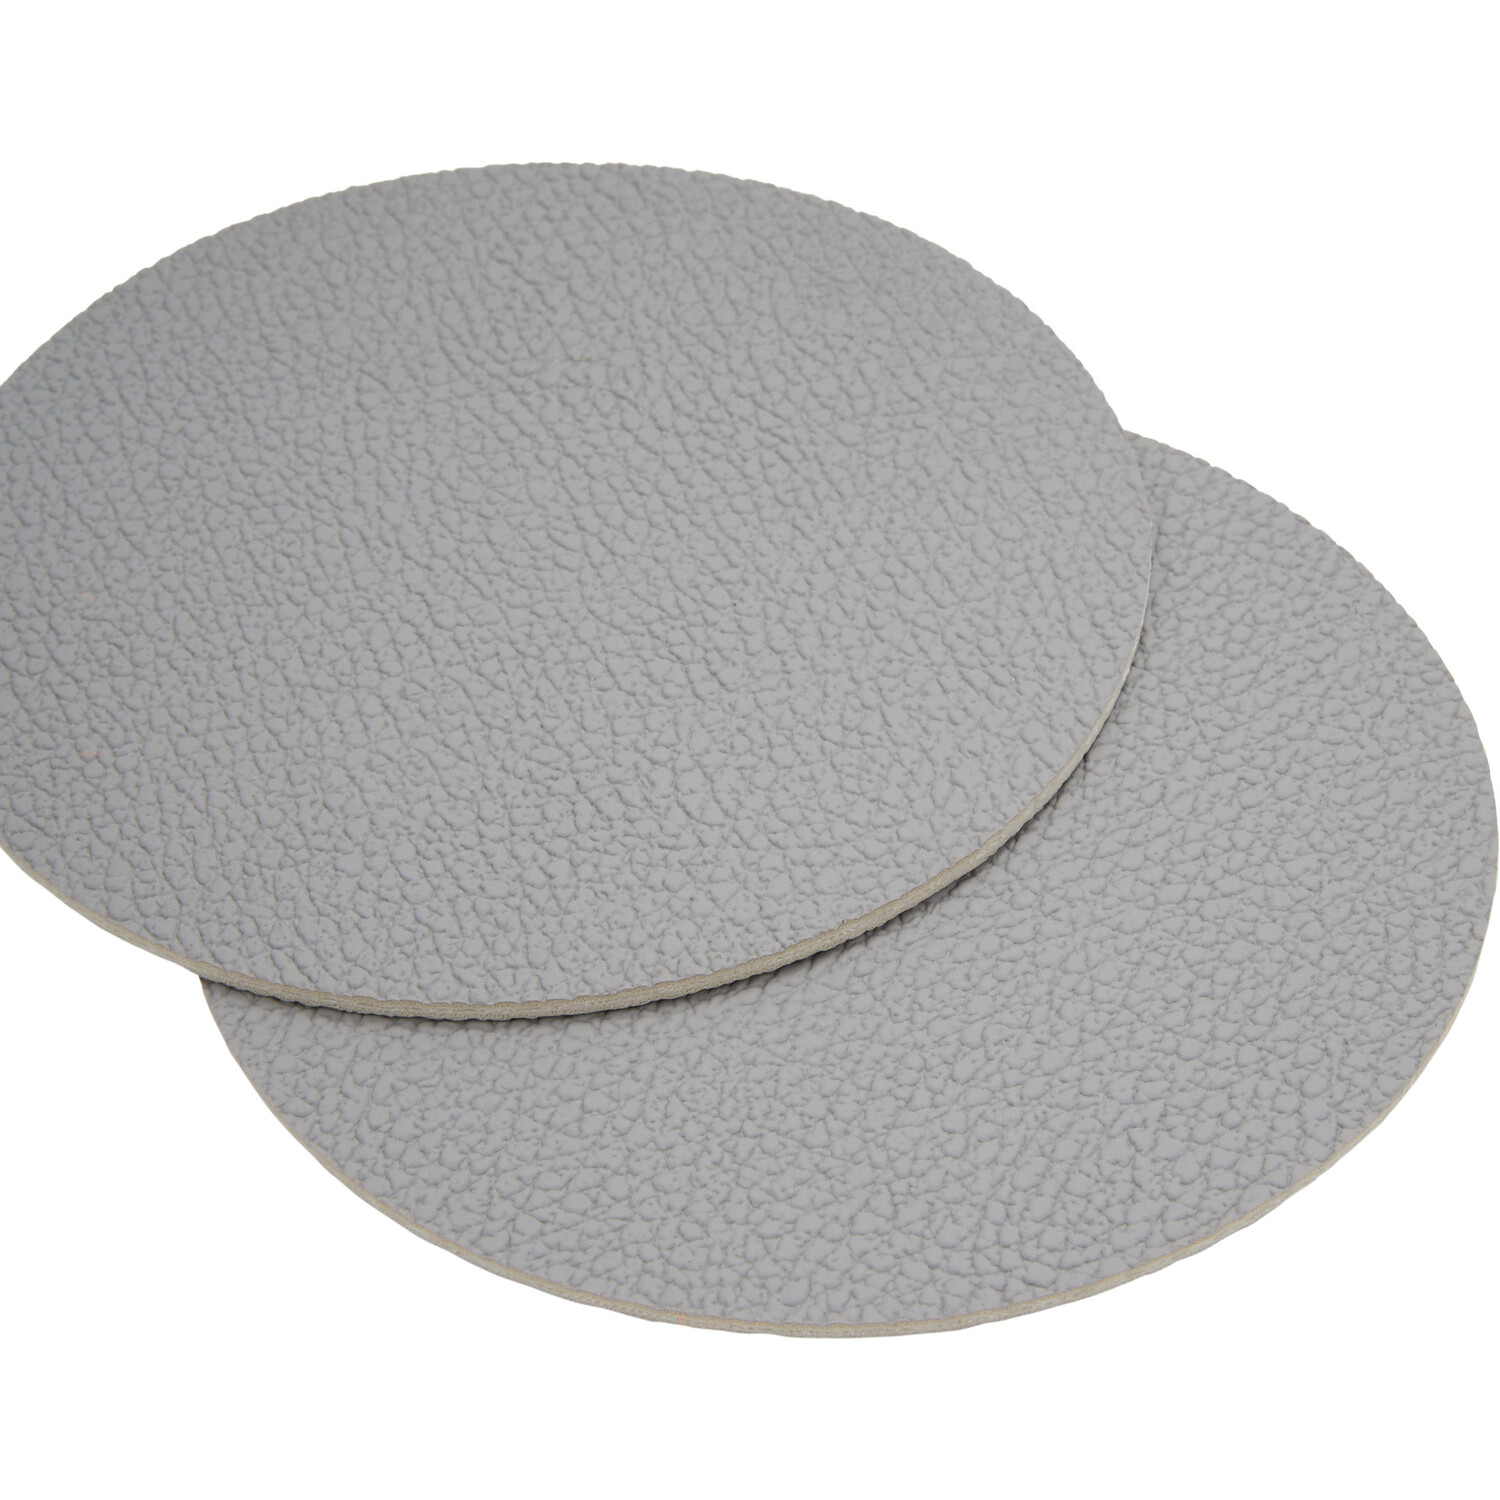 Set of 4 Round Fusion Faux Leather Coasters - Grey Image 4